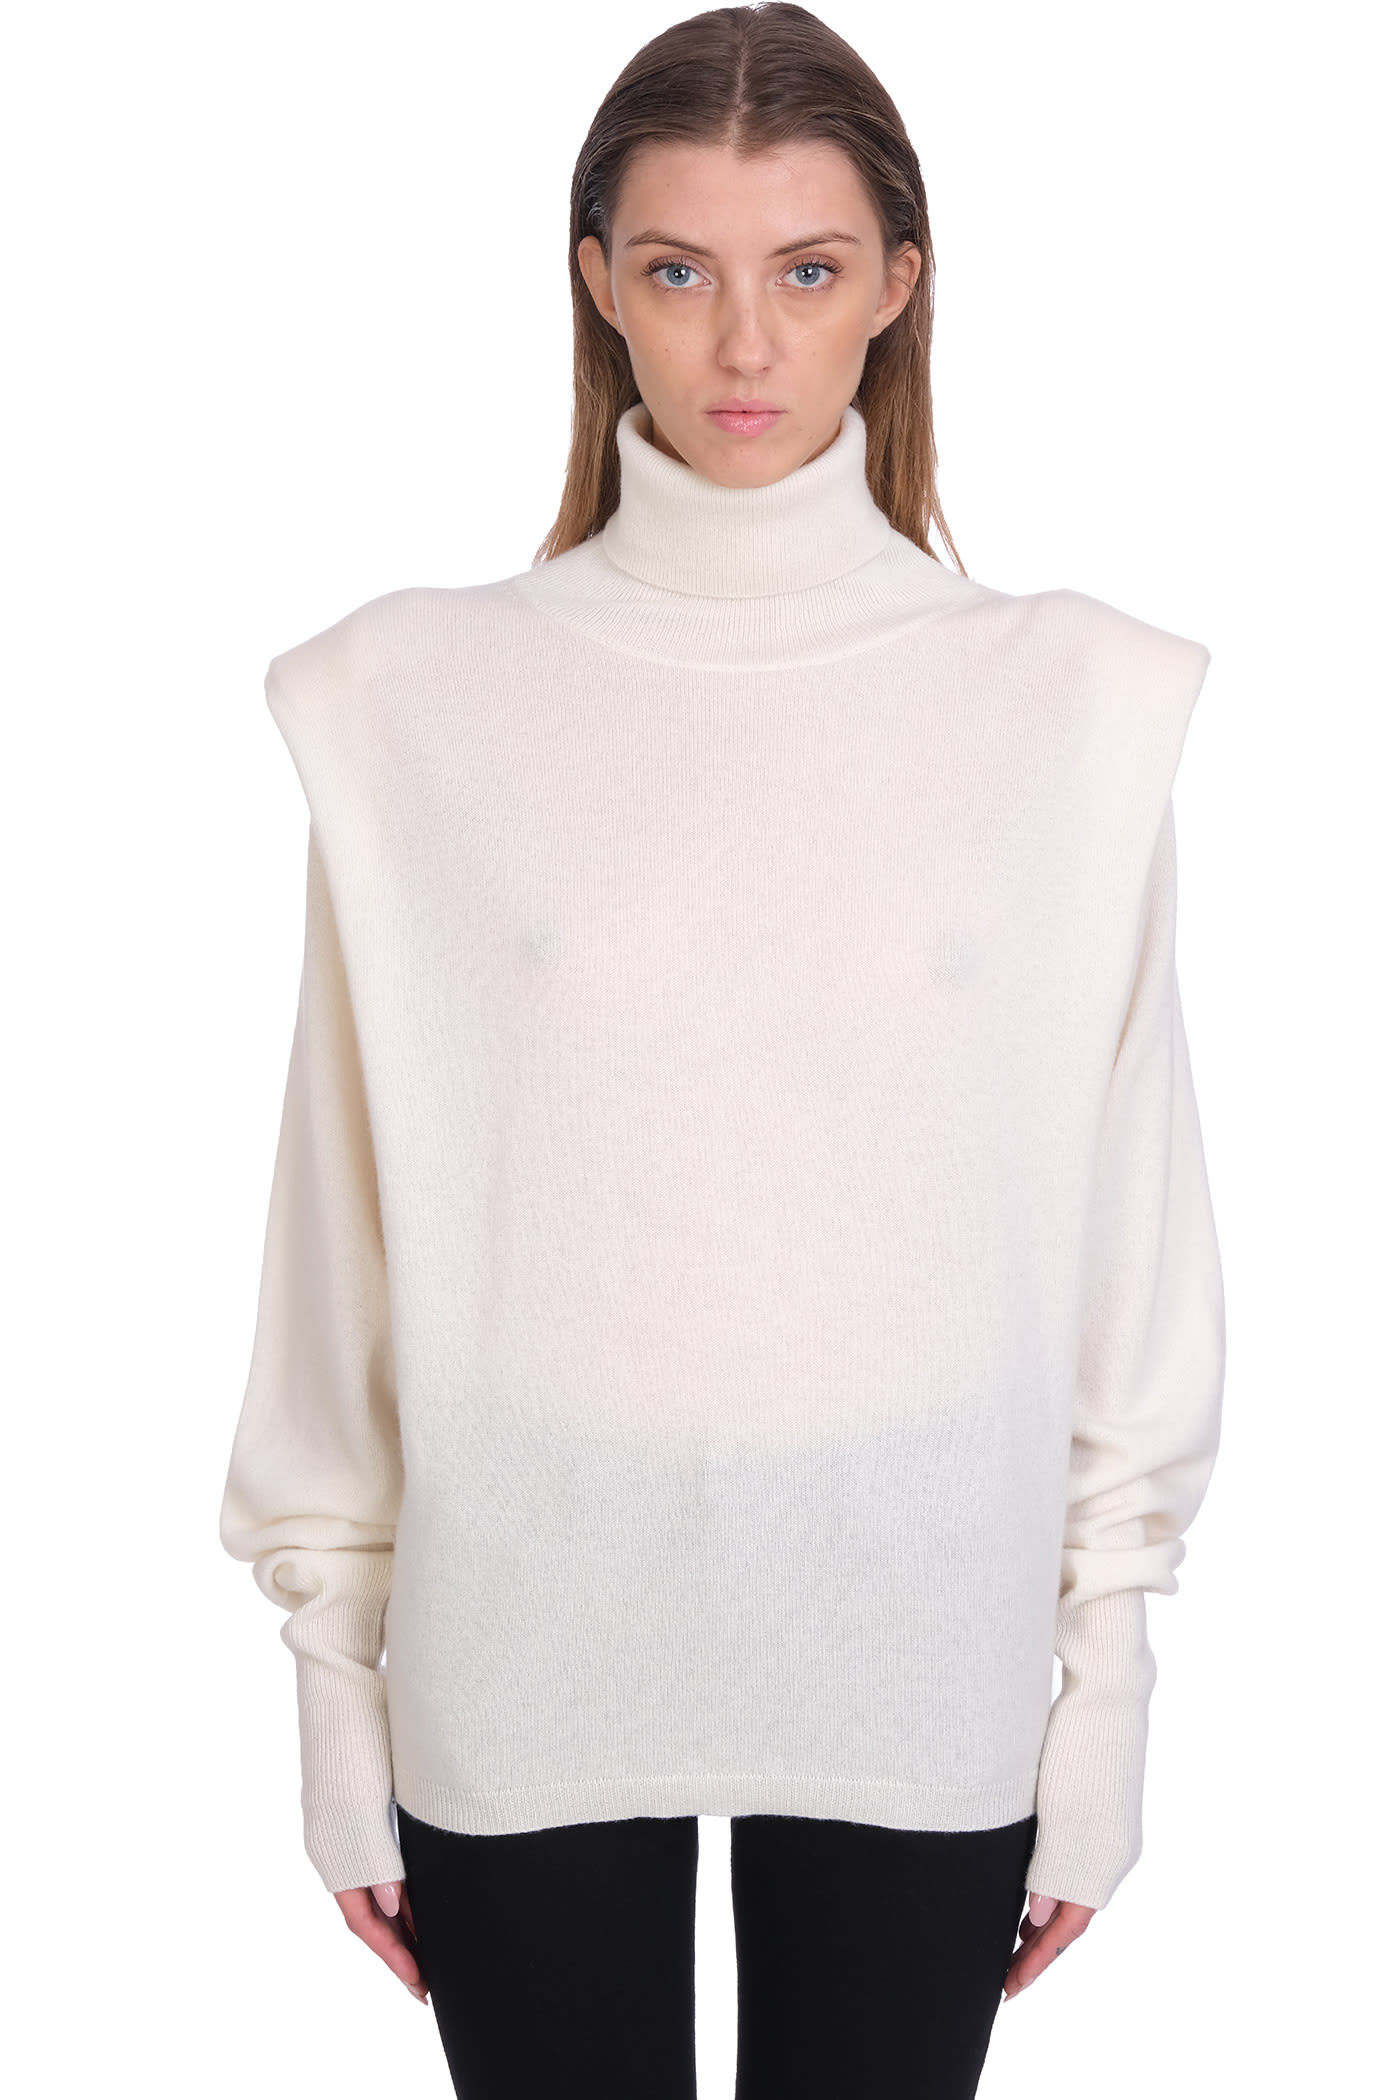 Jacob Lee Knitwear In White Cashmere